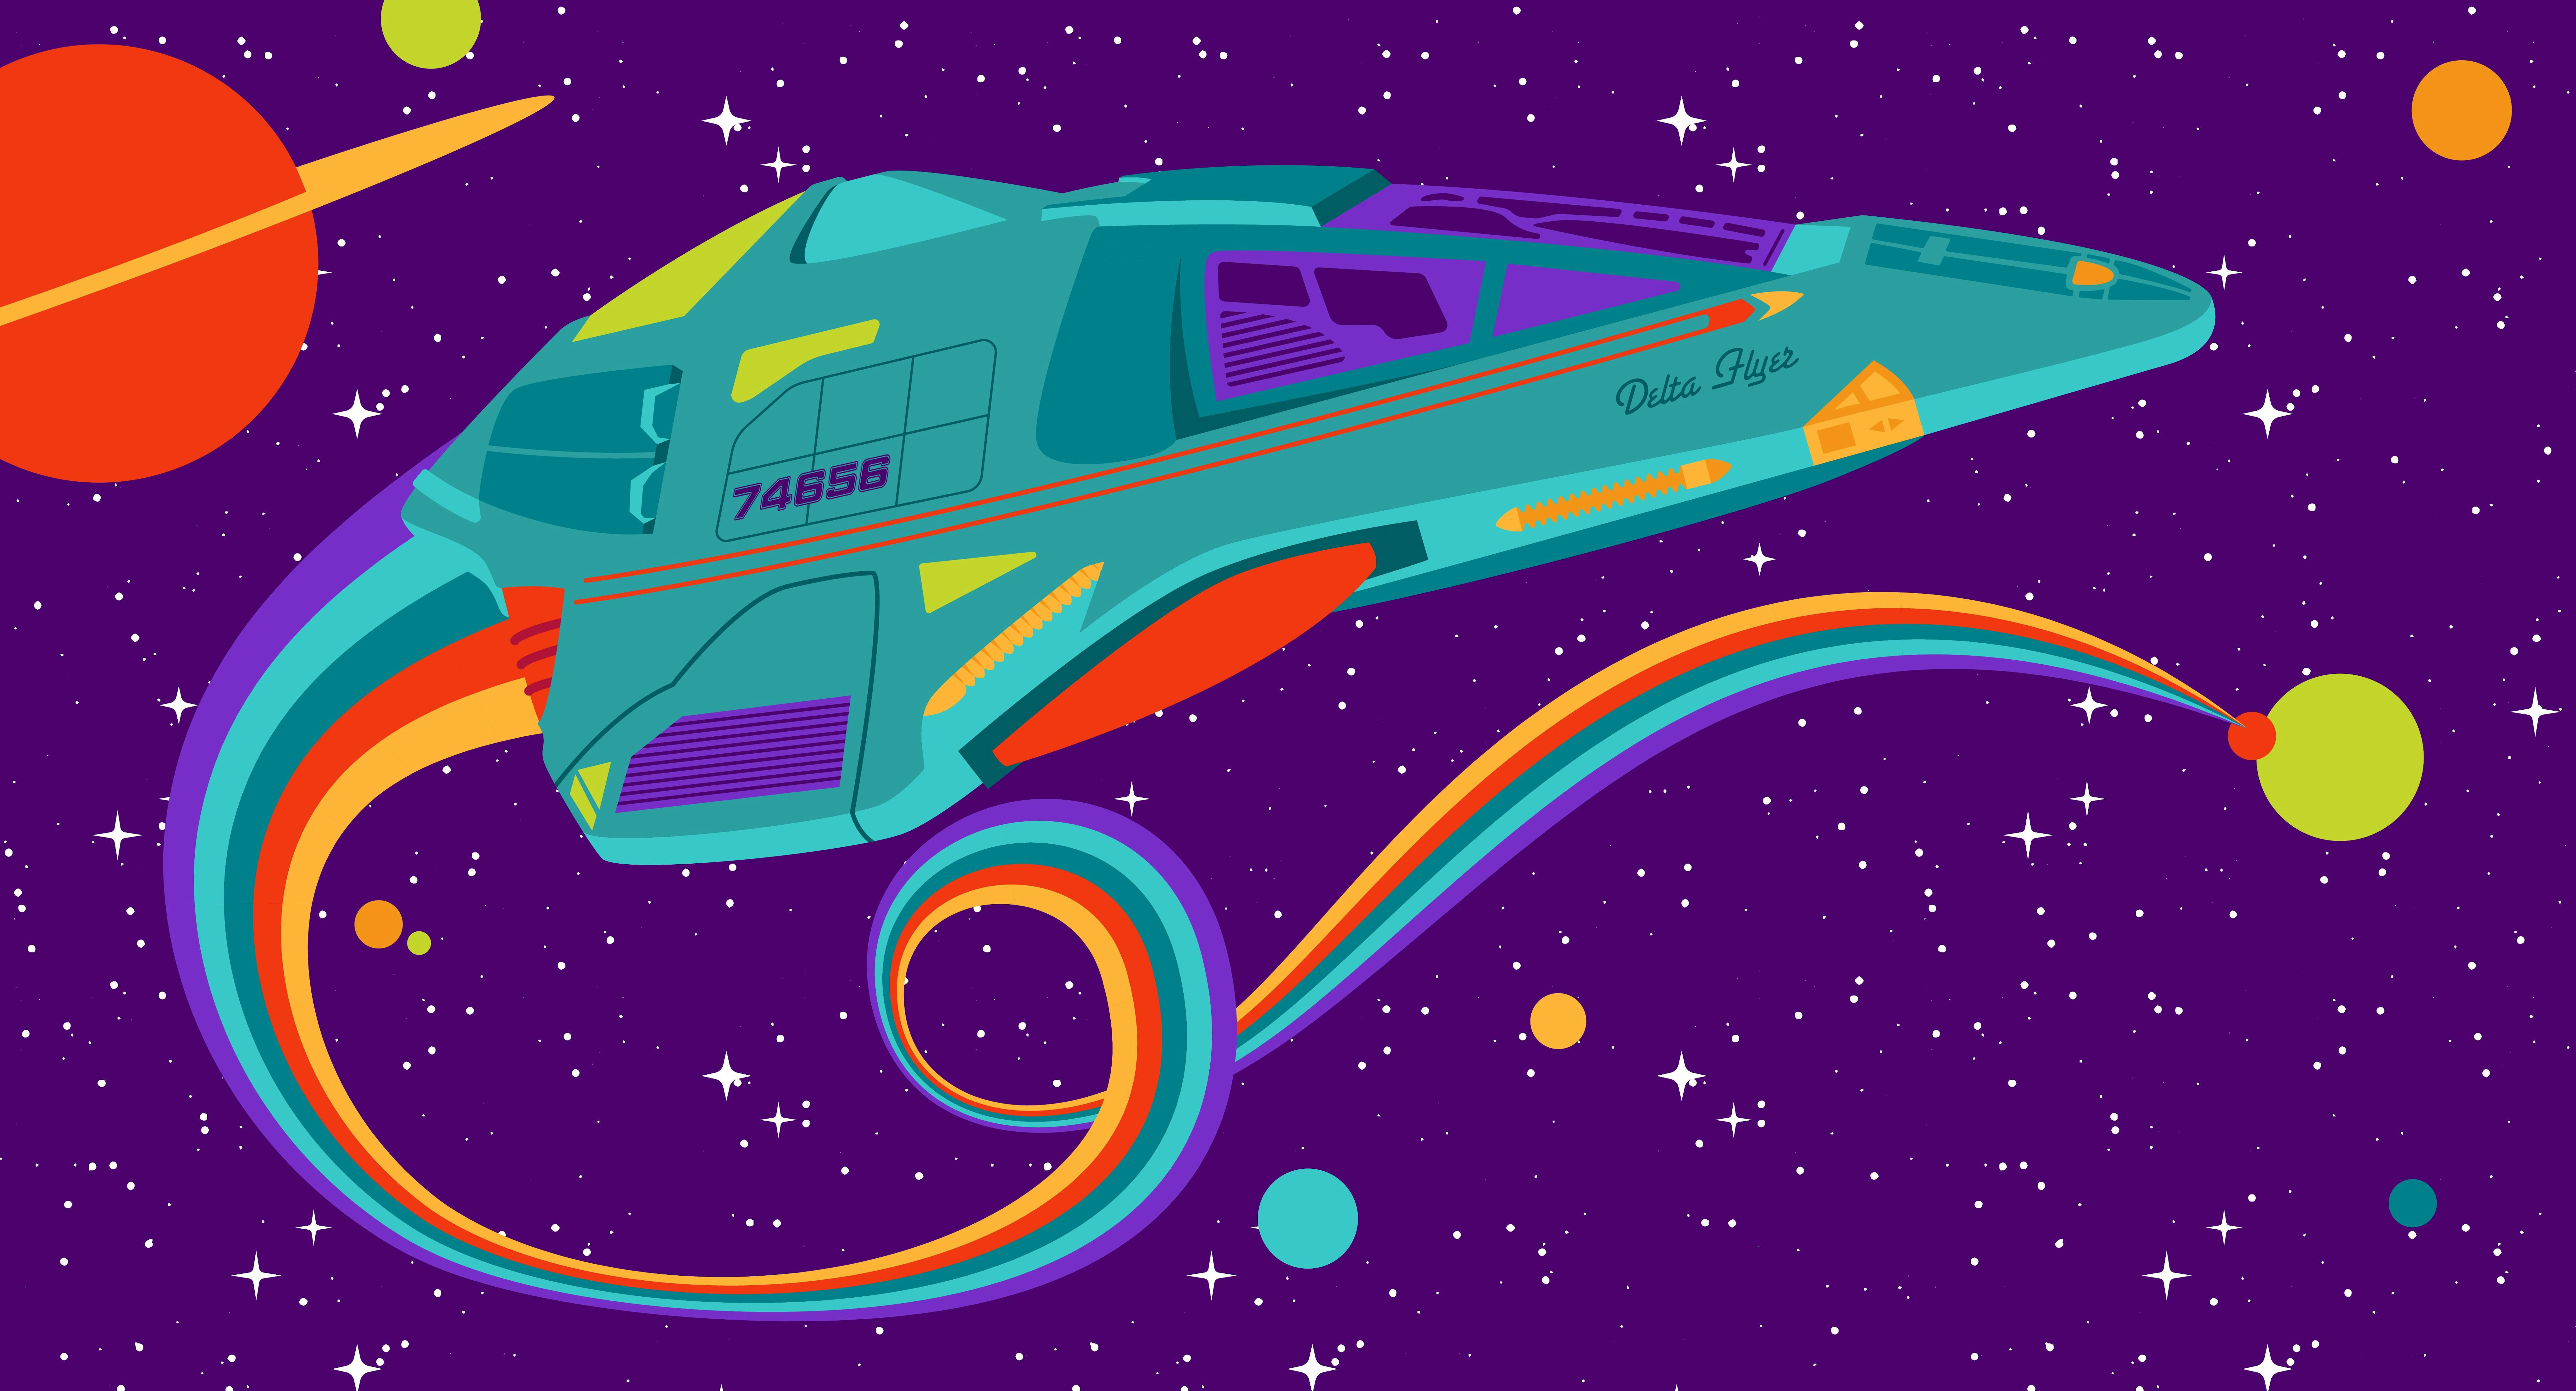 An illustrated version of the Delta Flyer soars against a purple background.